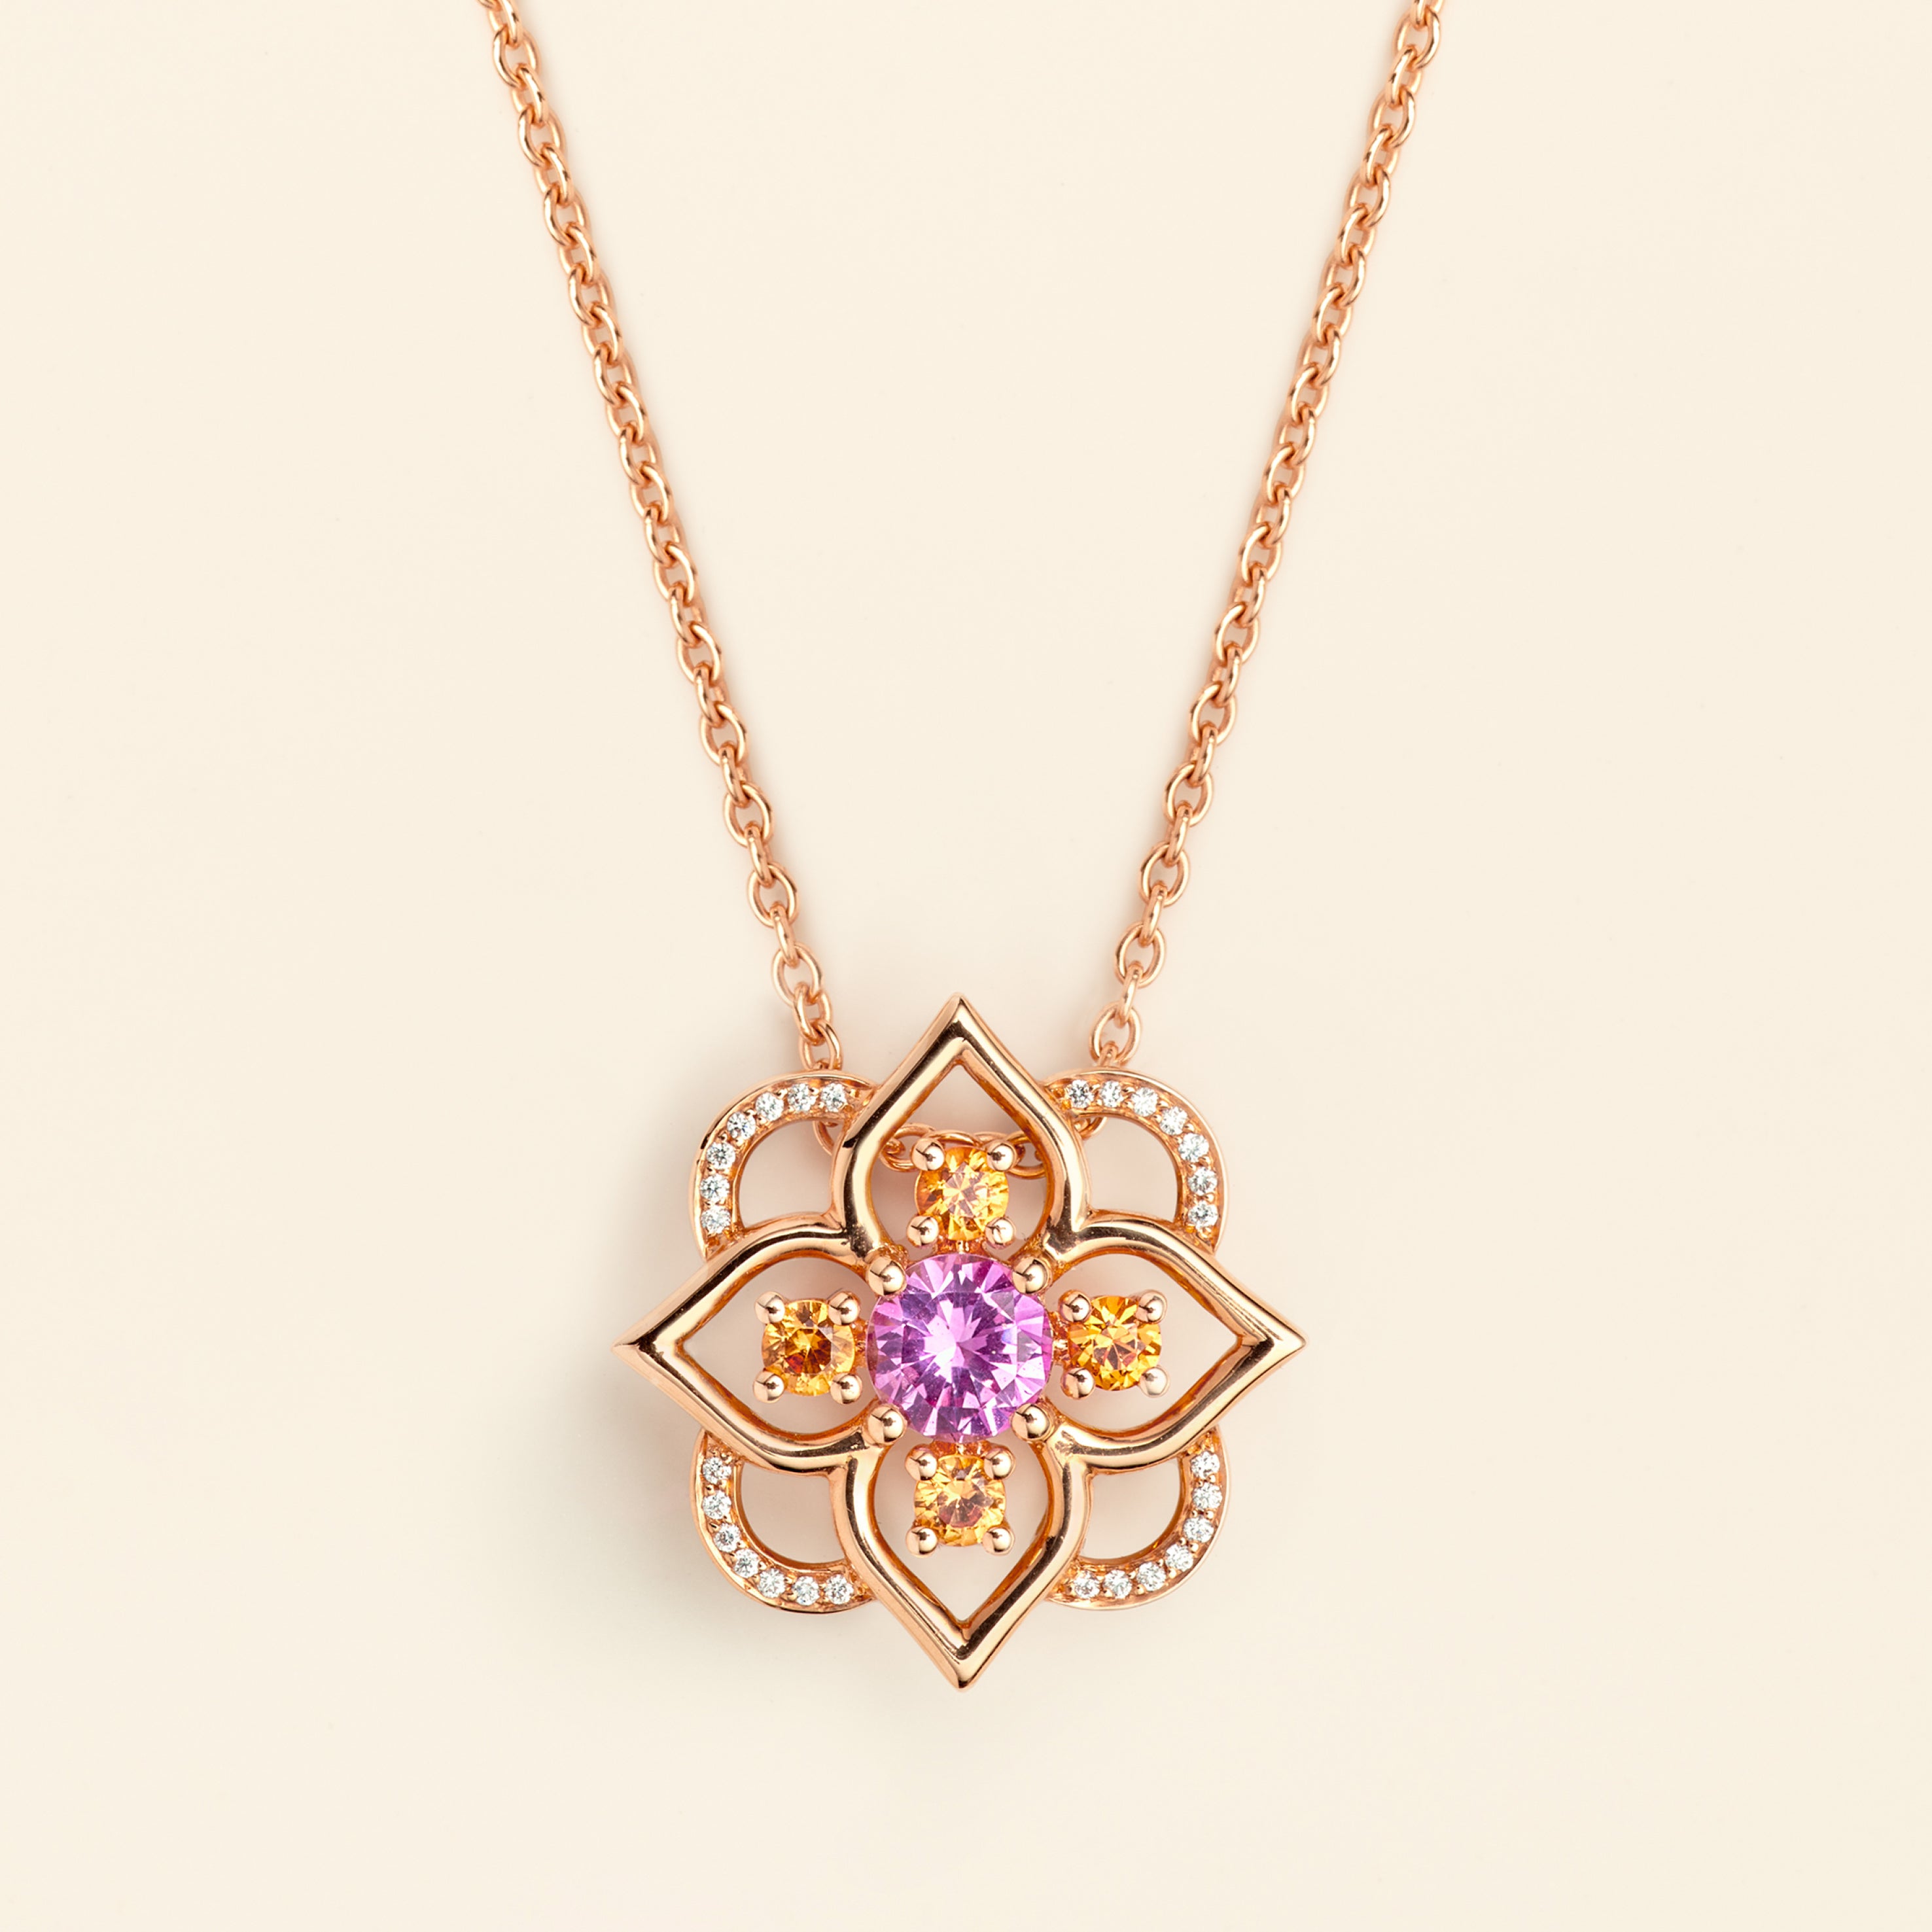 Giardino Necklace Pink Sapphire – Jewelry necklace in pink gold 18k with pink  sapphire and spessartites – Mellerio